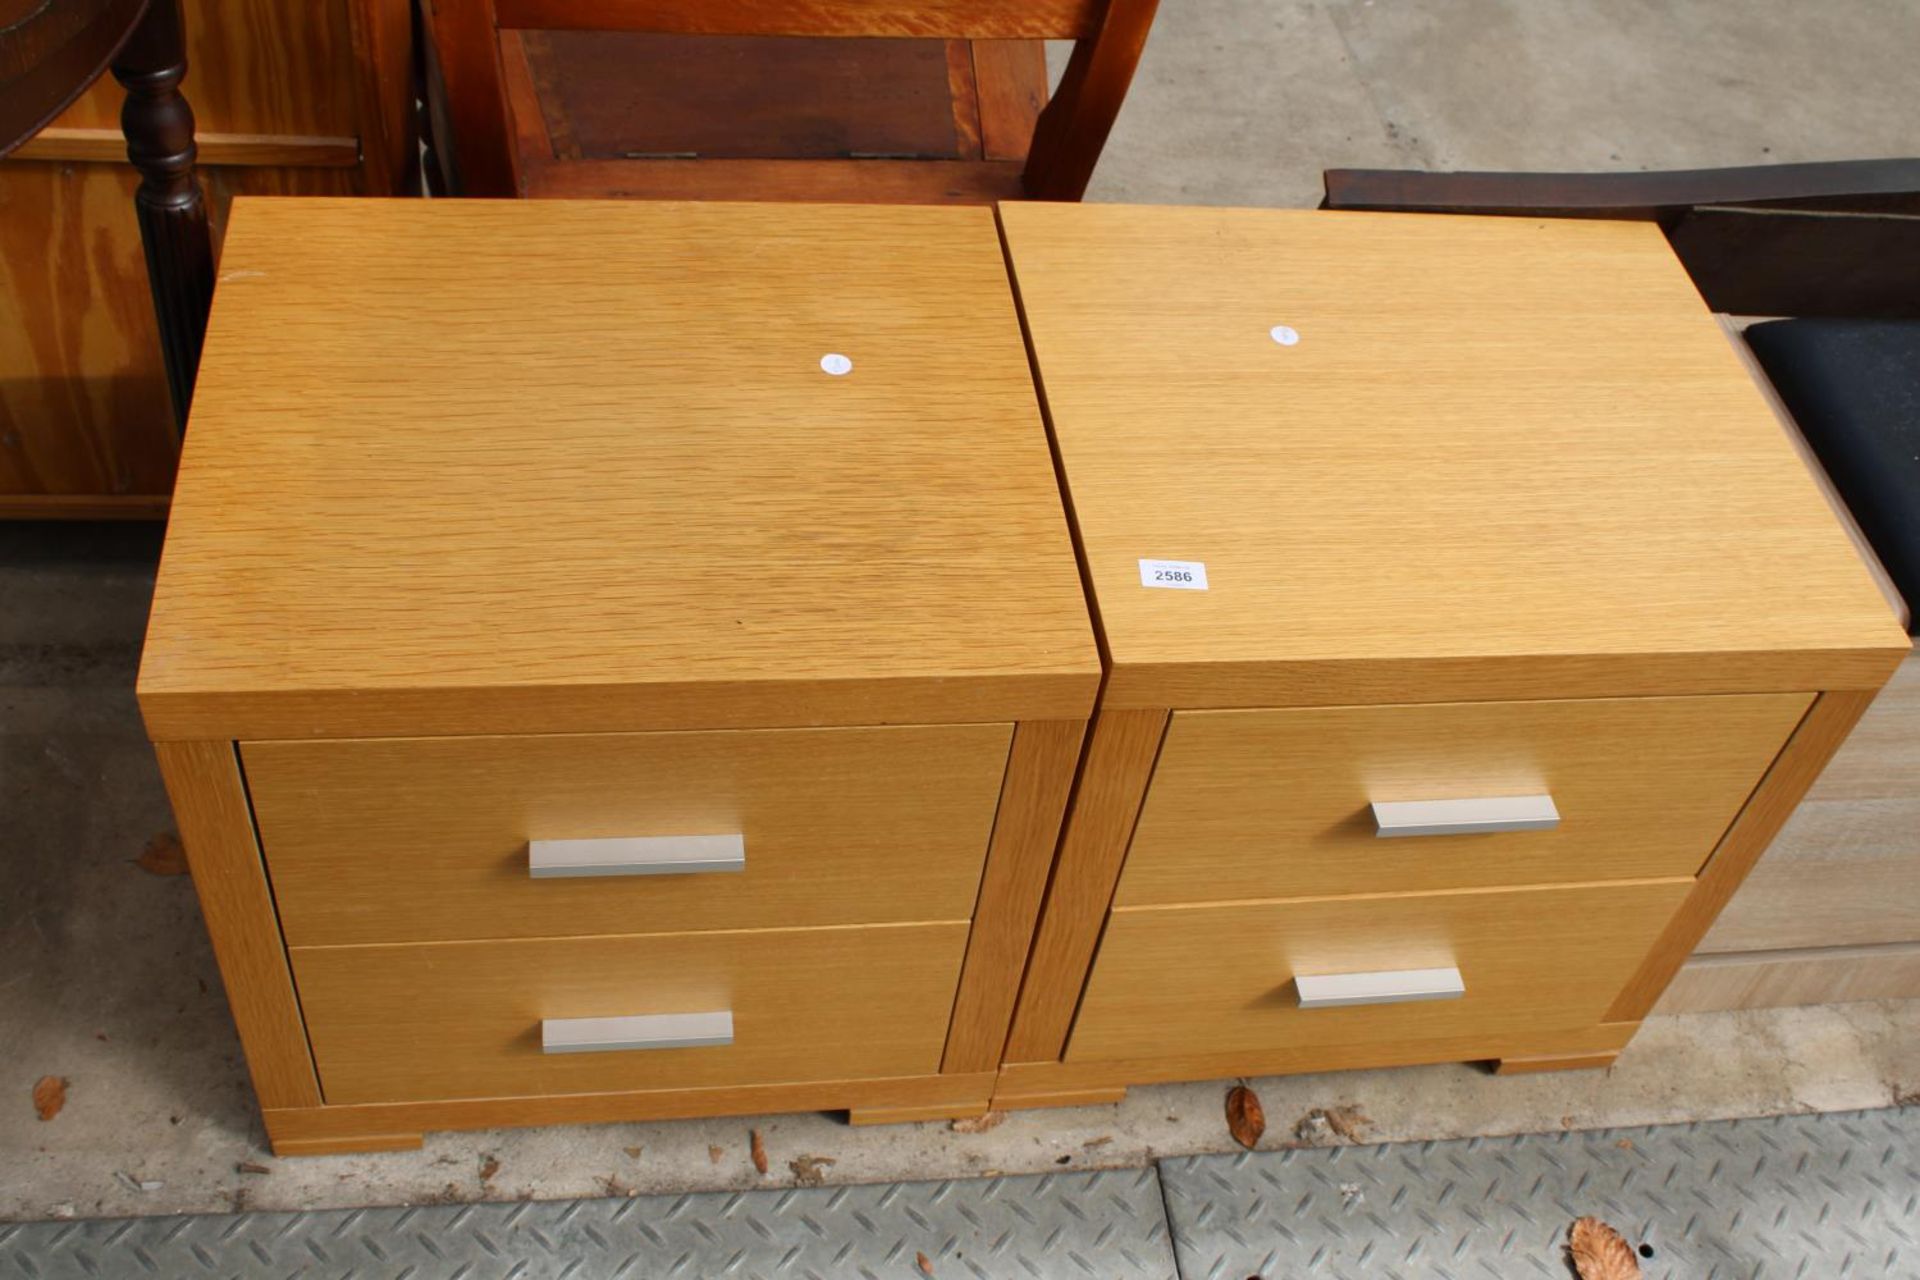 A PAIR OF MODERN OAK 2 DRAWER BEDSIDE CHESTS